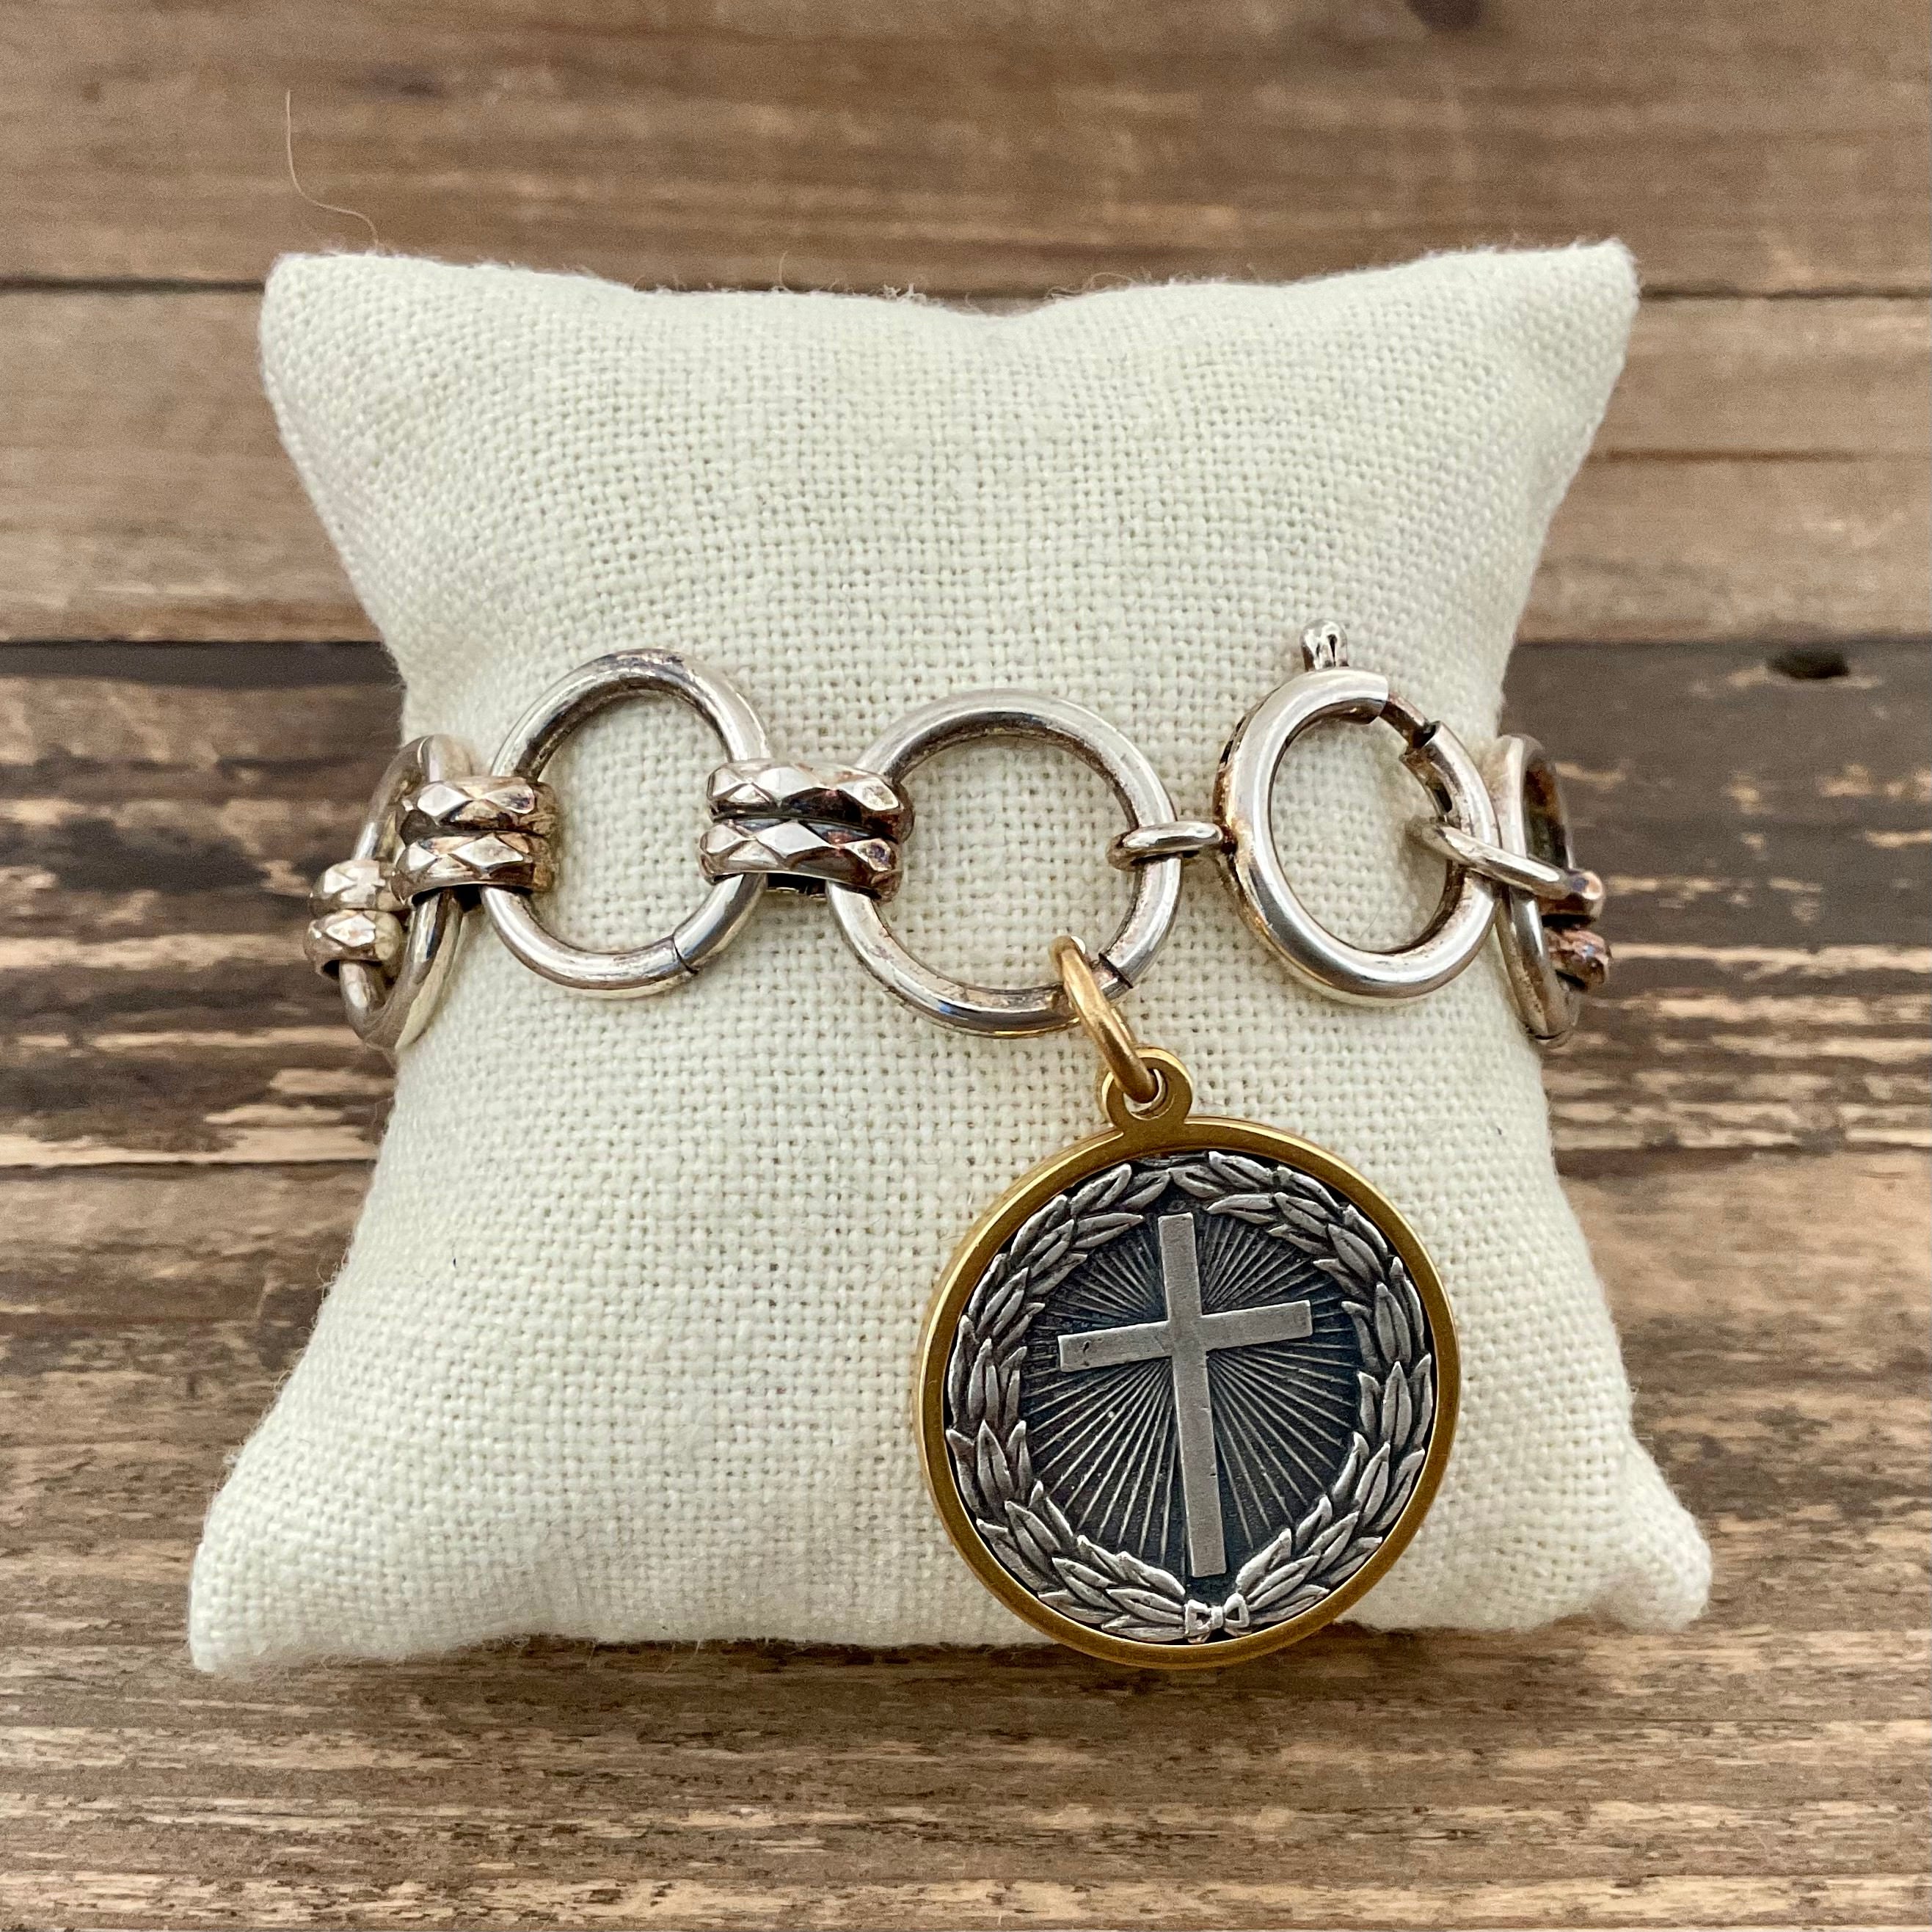 Vintage Silver Plated Bracelet with Cross Charm